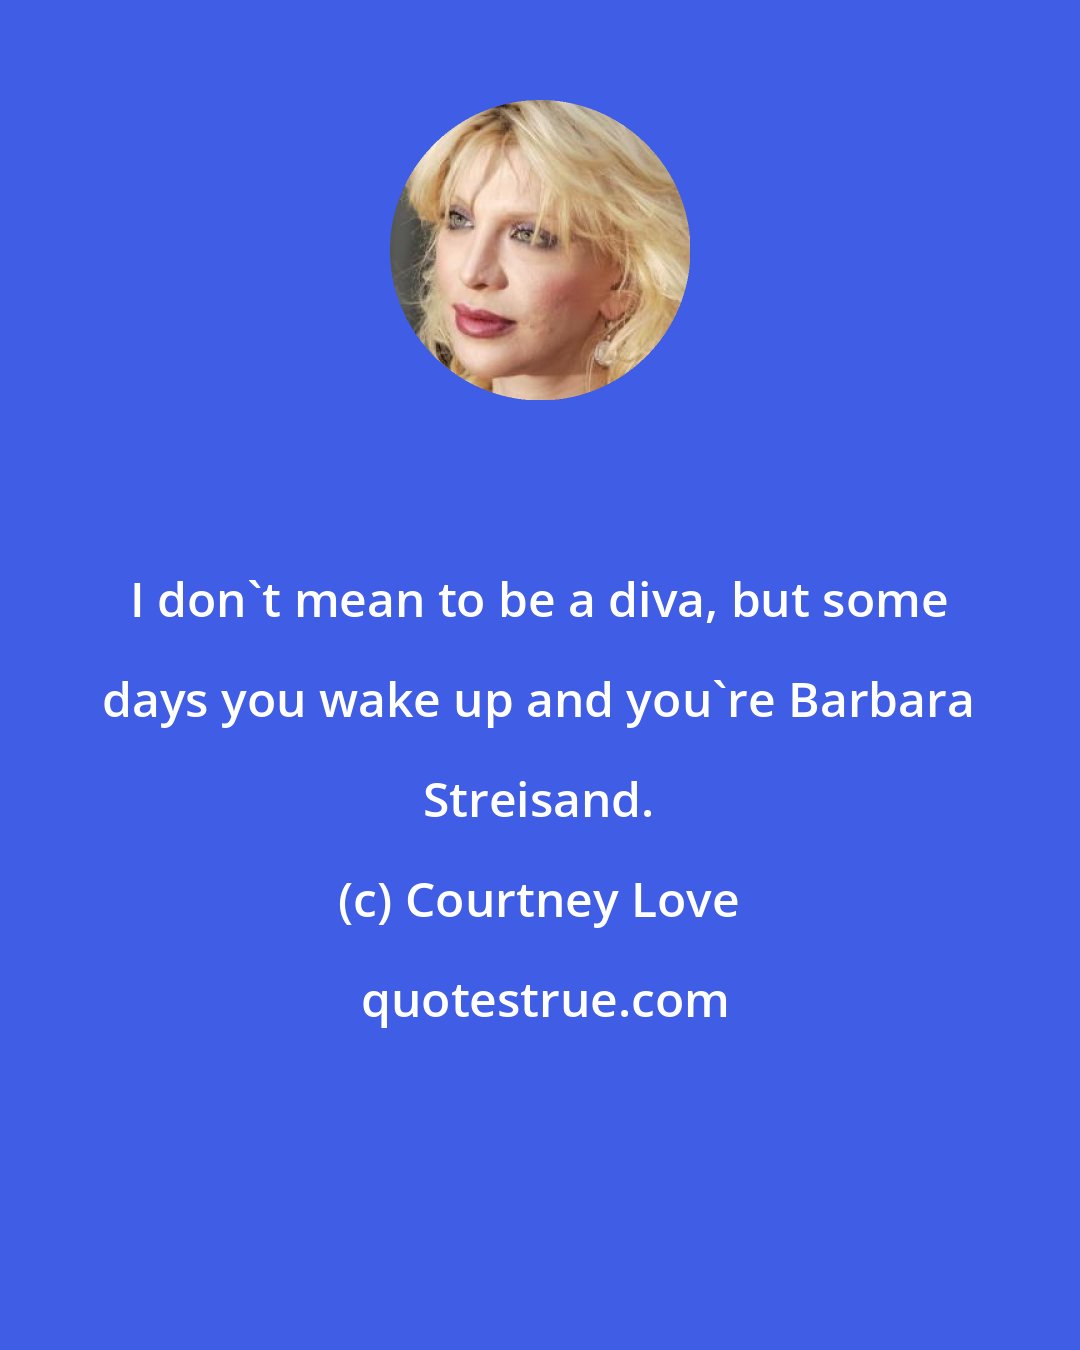 Courtney Love: I don't mean to be a diva, but some days you wake up and you're Barbara Streisand.